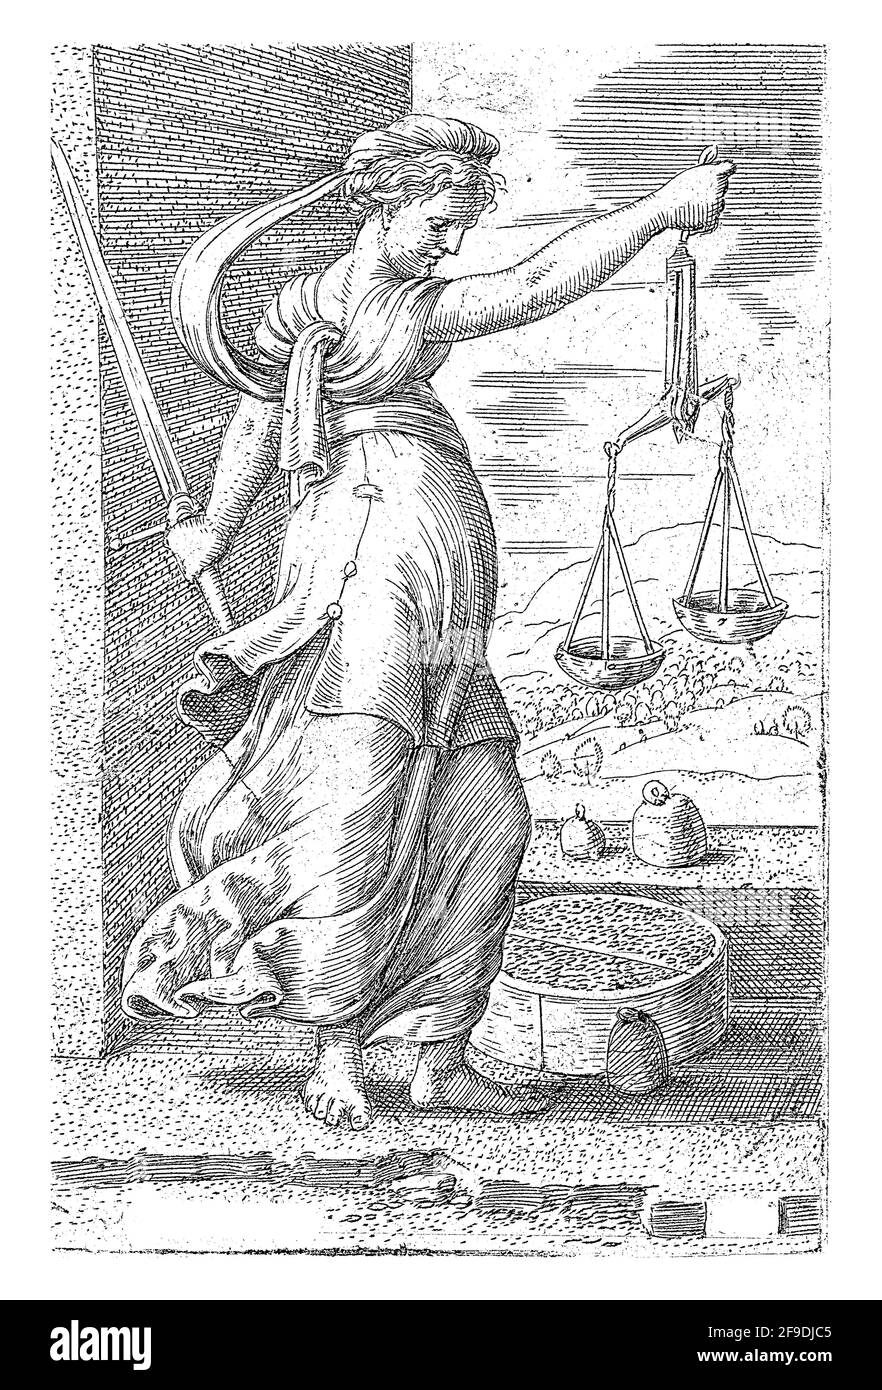 The personification of the virtue of Justice with the scales in one hand and the sword in the other. There are weights at her feet and on a wall. In t Stock Photo